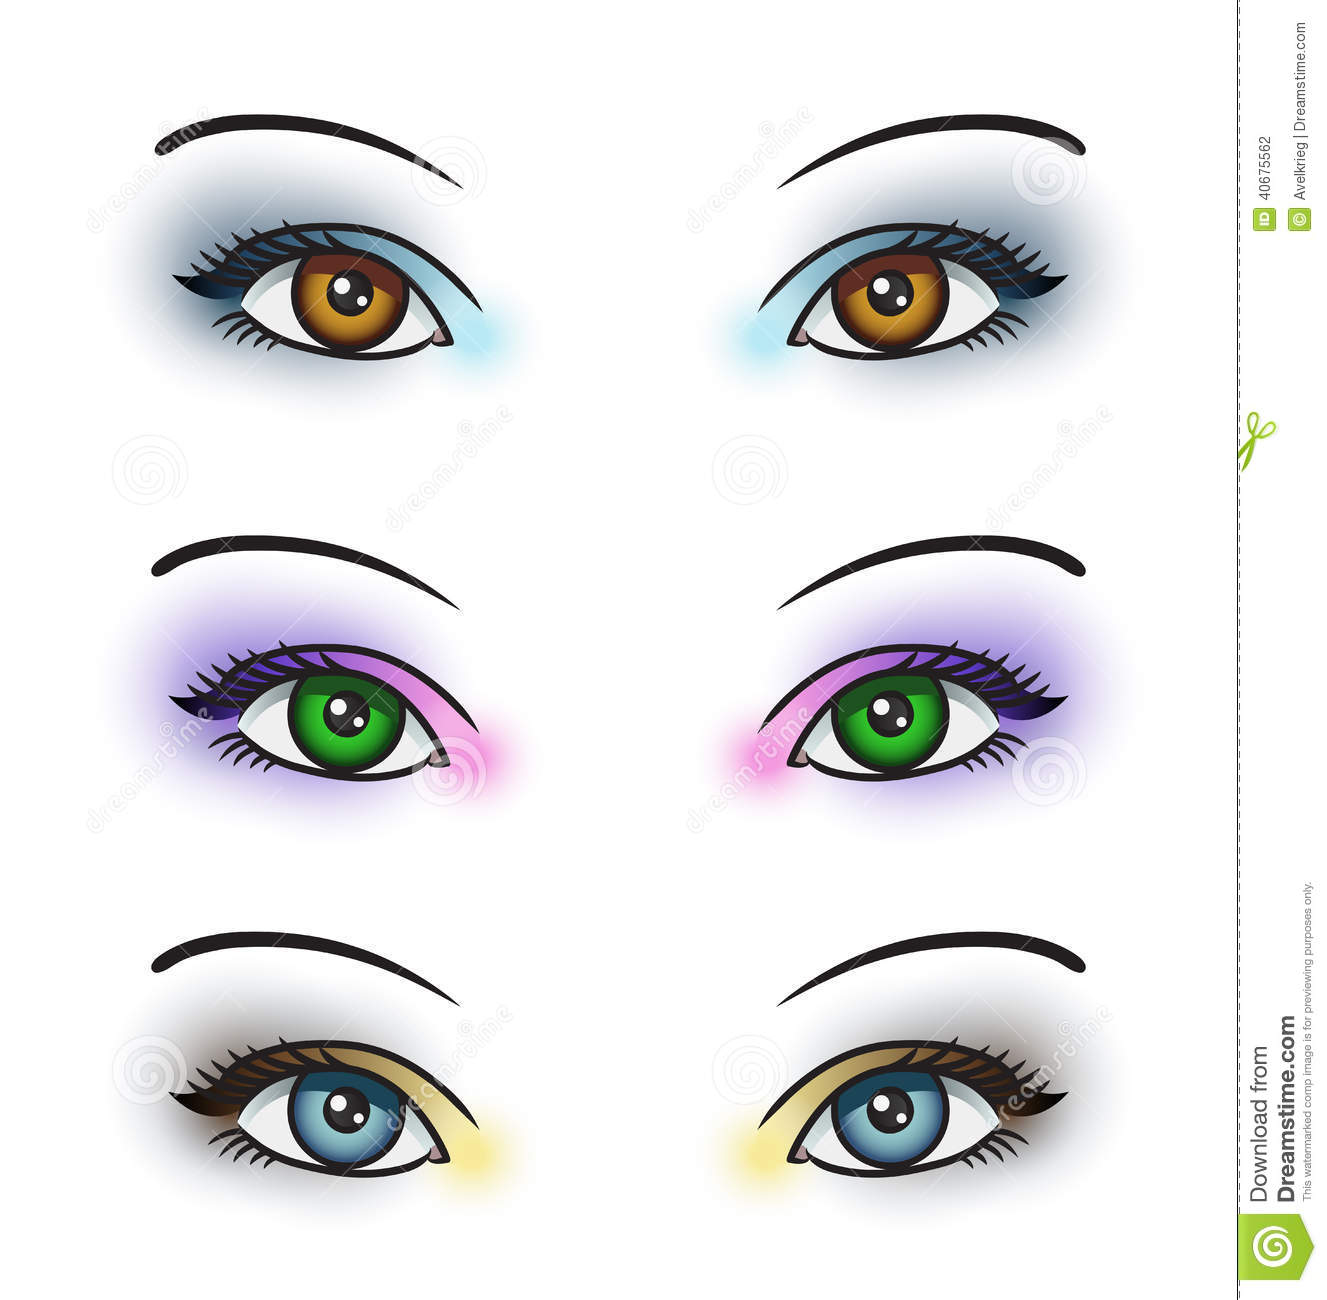     Depicting 3 Sets Of Eyes With Different Colored Eye Makeup